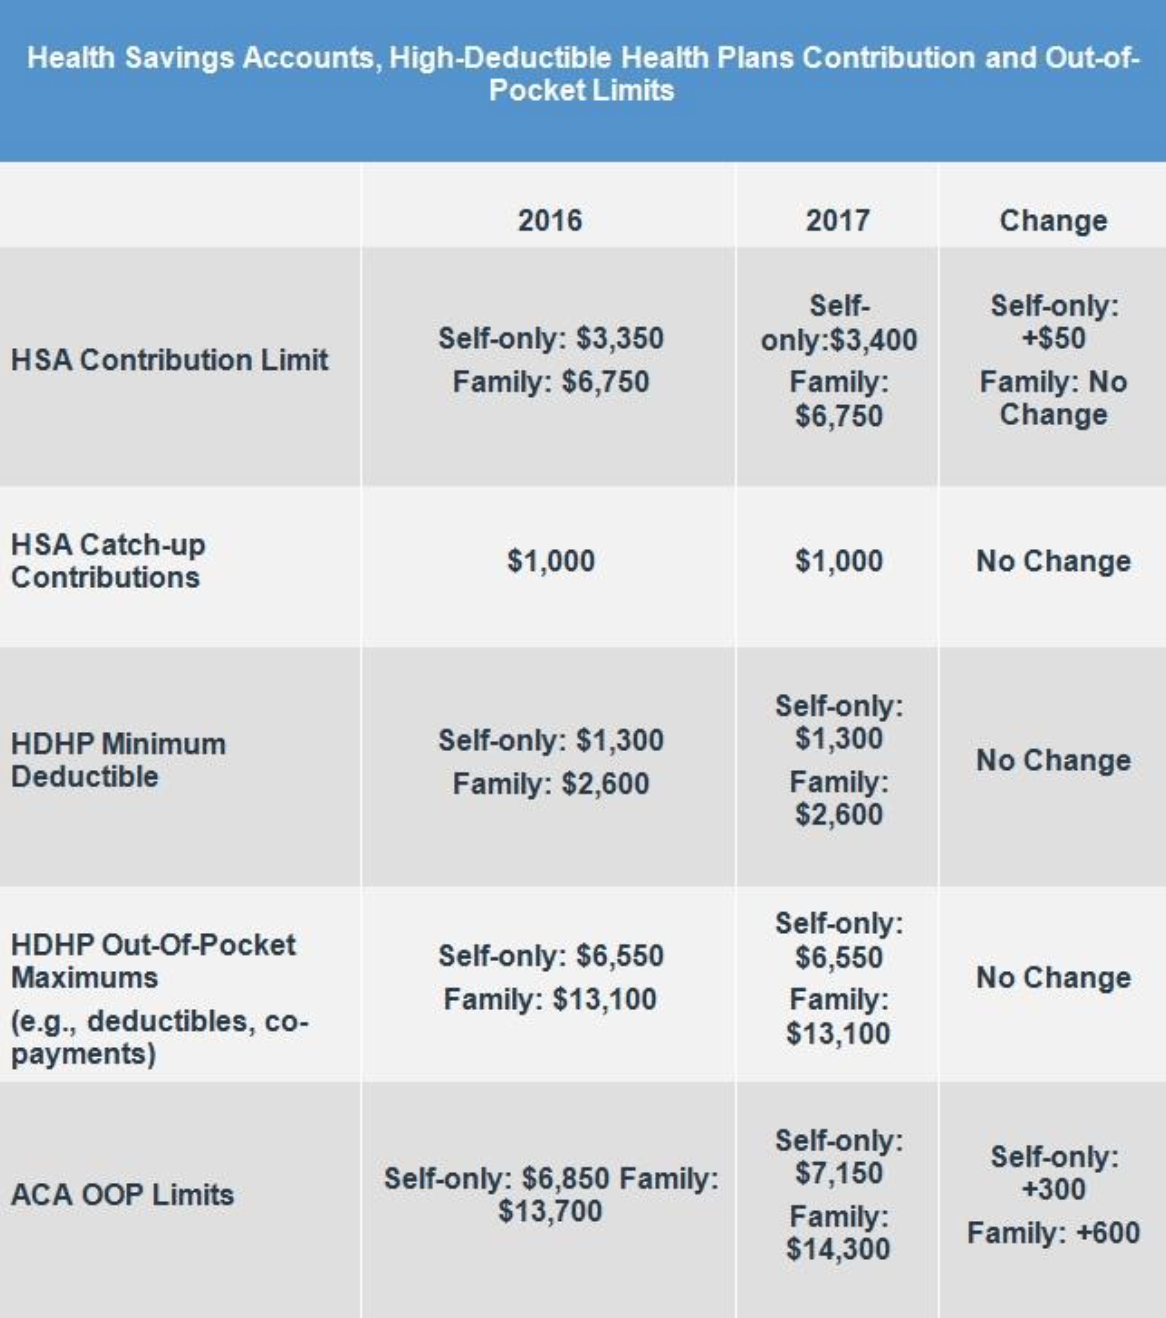 table comparing 2016 and 2017: Health Savings Accounts, High-Deductible Health Plans Contribution and Out-of-Pocket Limits